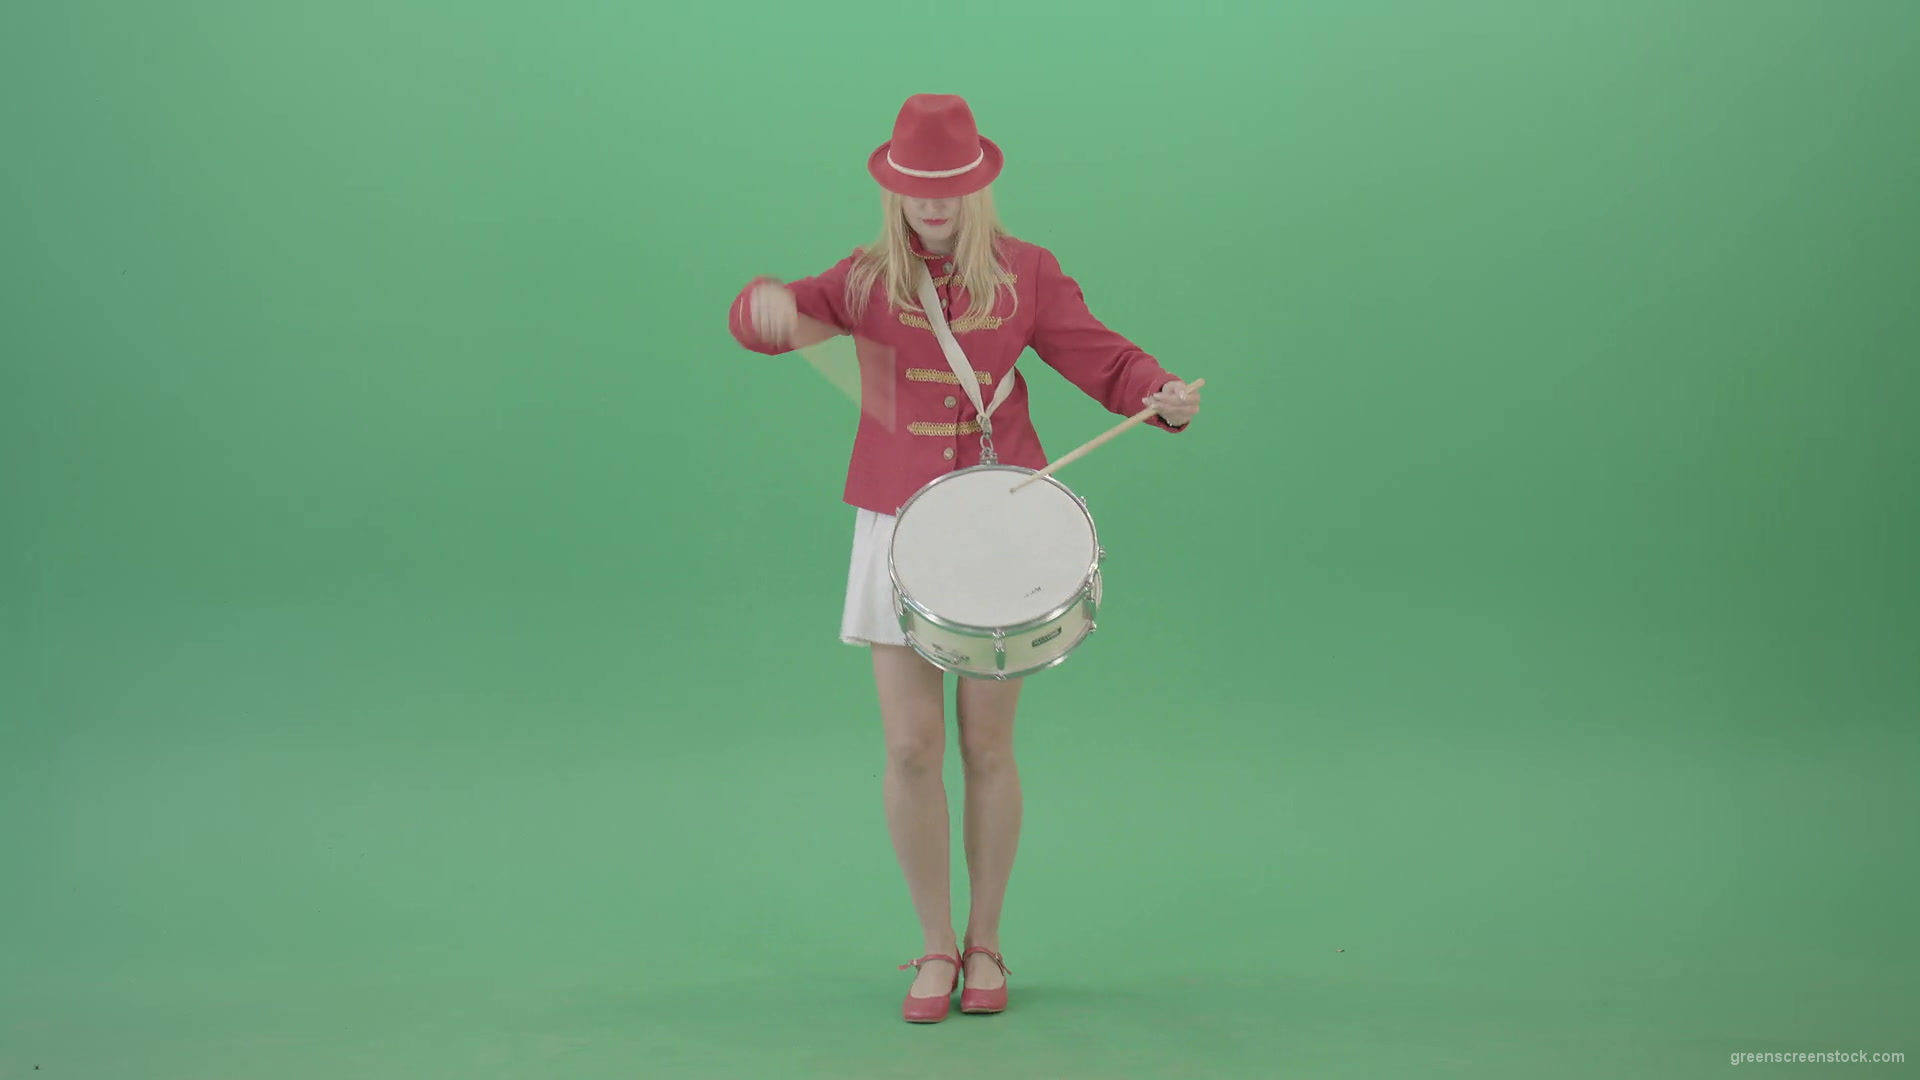 Girl-in-red-dress-marching-and-playing-drum-snare-music-instrument-over-green-screen-4K-Video-Footage-1920_008 Green Screen Stock